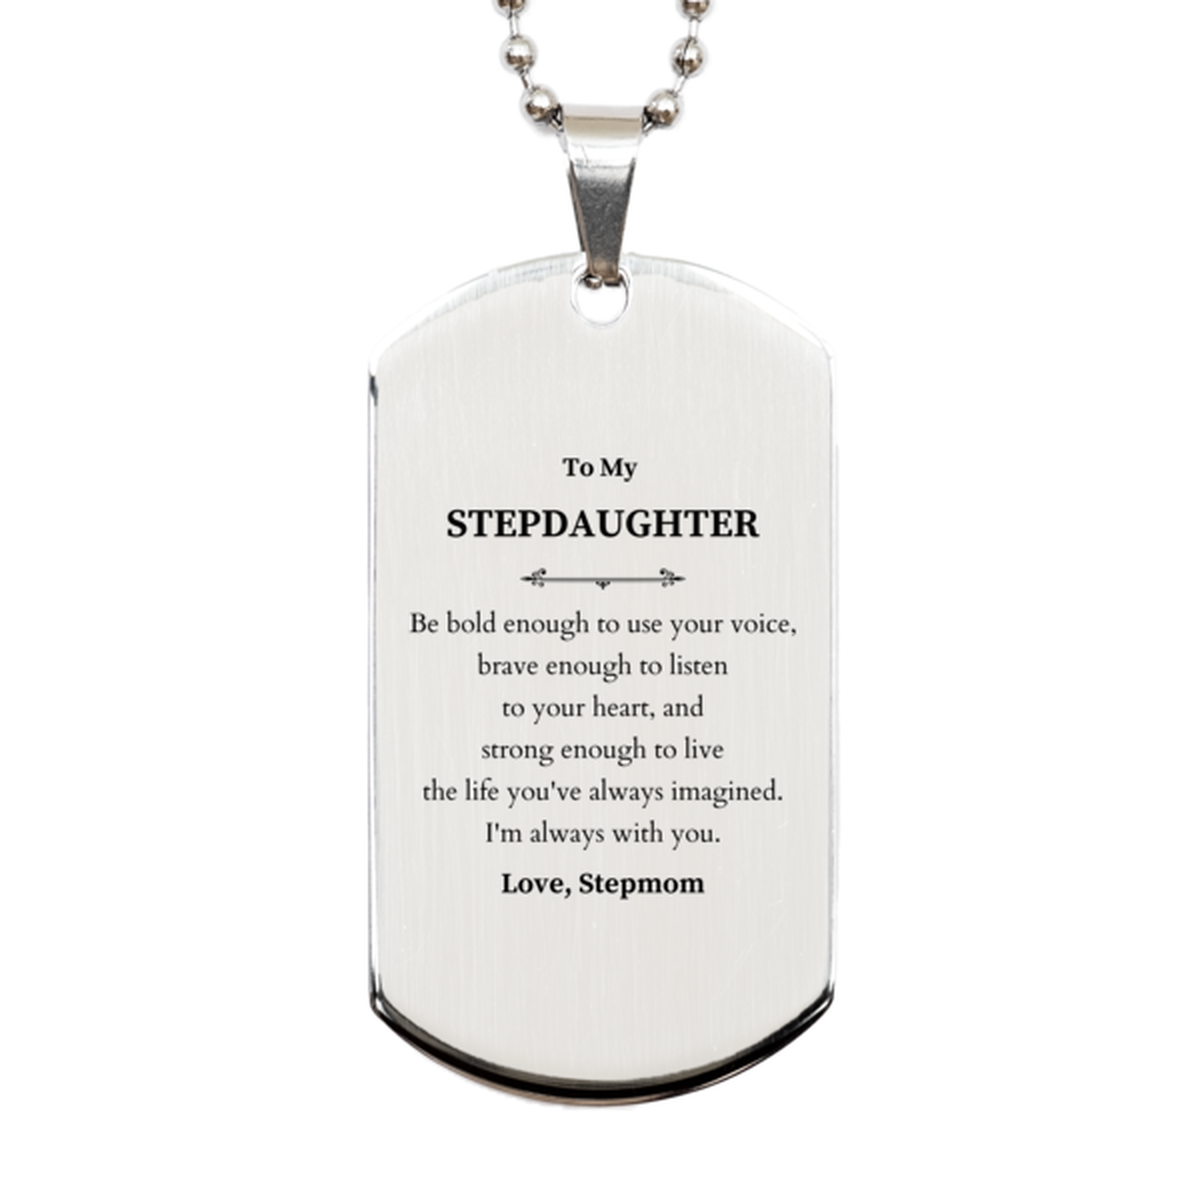 Keepsake Stepdaughter Silver Dog Tag Gift Idea Graduation Christmas Birthday Stepdaughter from Stepmom, Stepdaughter Be bold enough to use your voice, brave enough to listen to your heart. Love, Stepmom